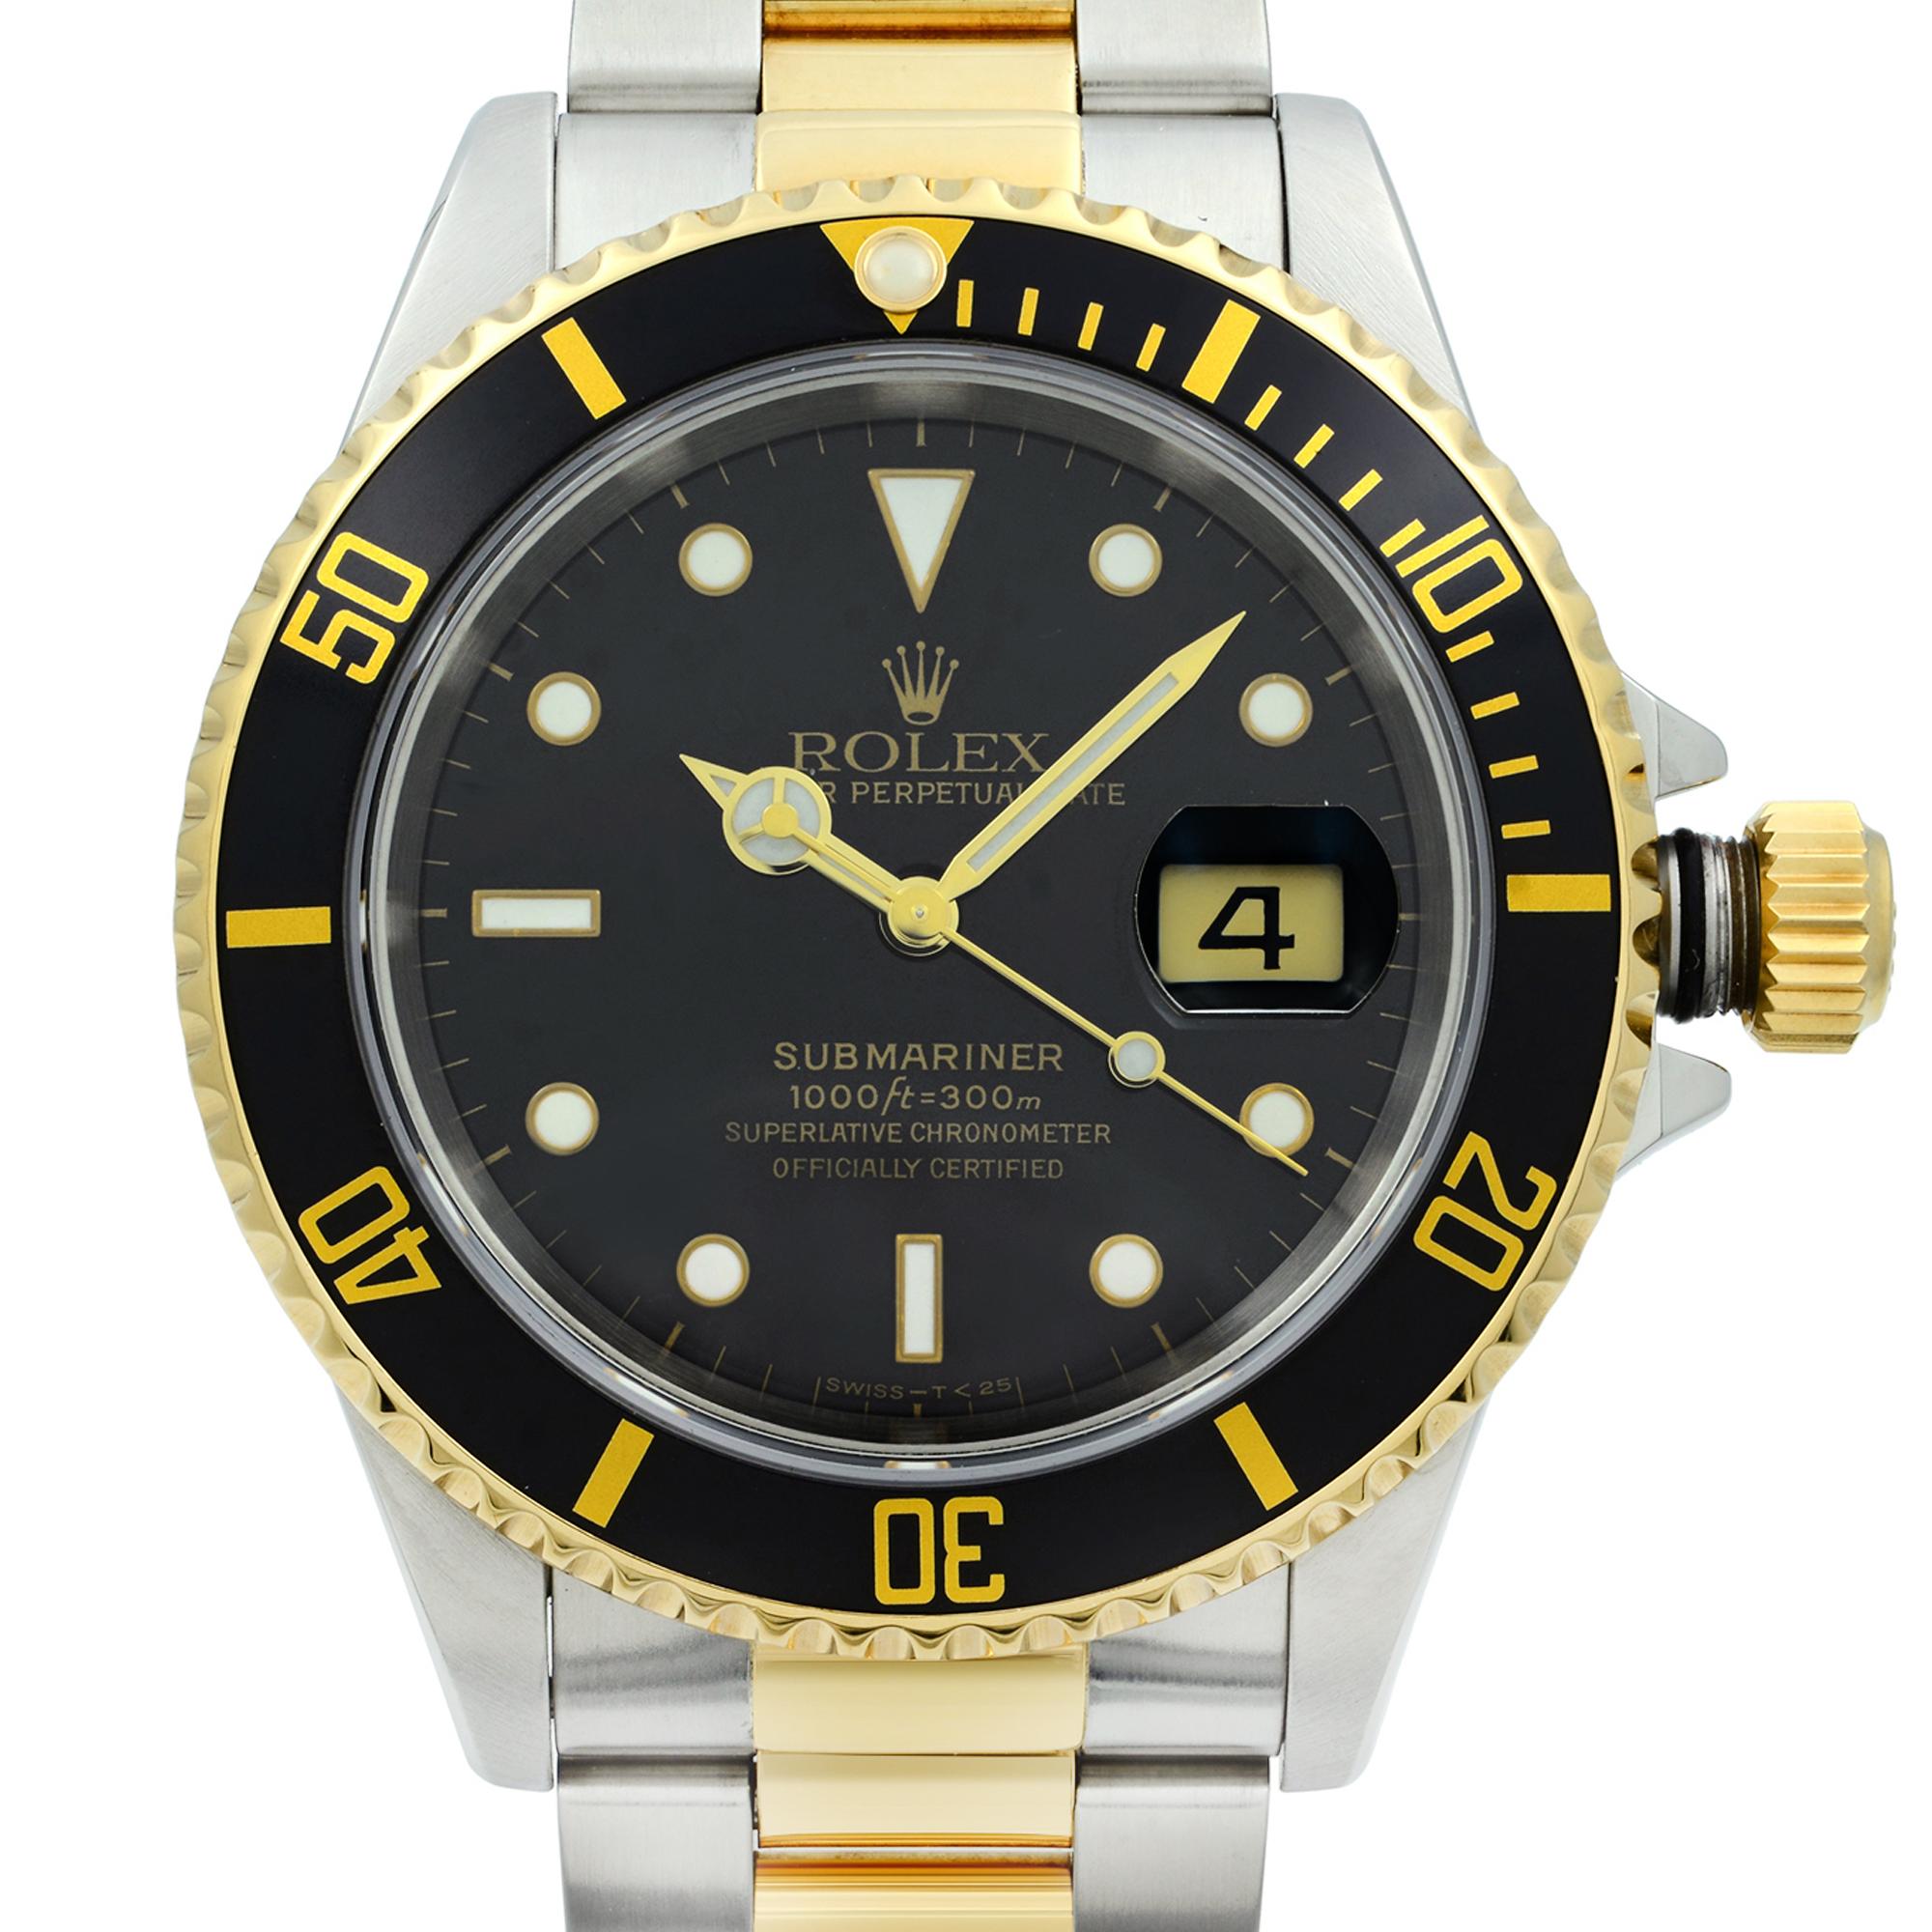 Pre-owned condition with a slight slack on the bracelet. Watch has a clean bezel, dial, and hands. The watch was serviced By Rolex in 2018. Comes With Original Box and  Factory Rolex Service papers. Backed by a 1 year warranty provided by